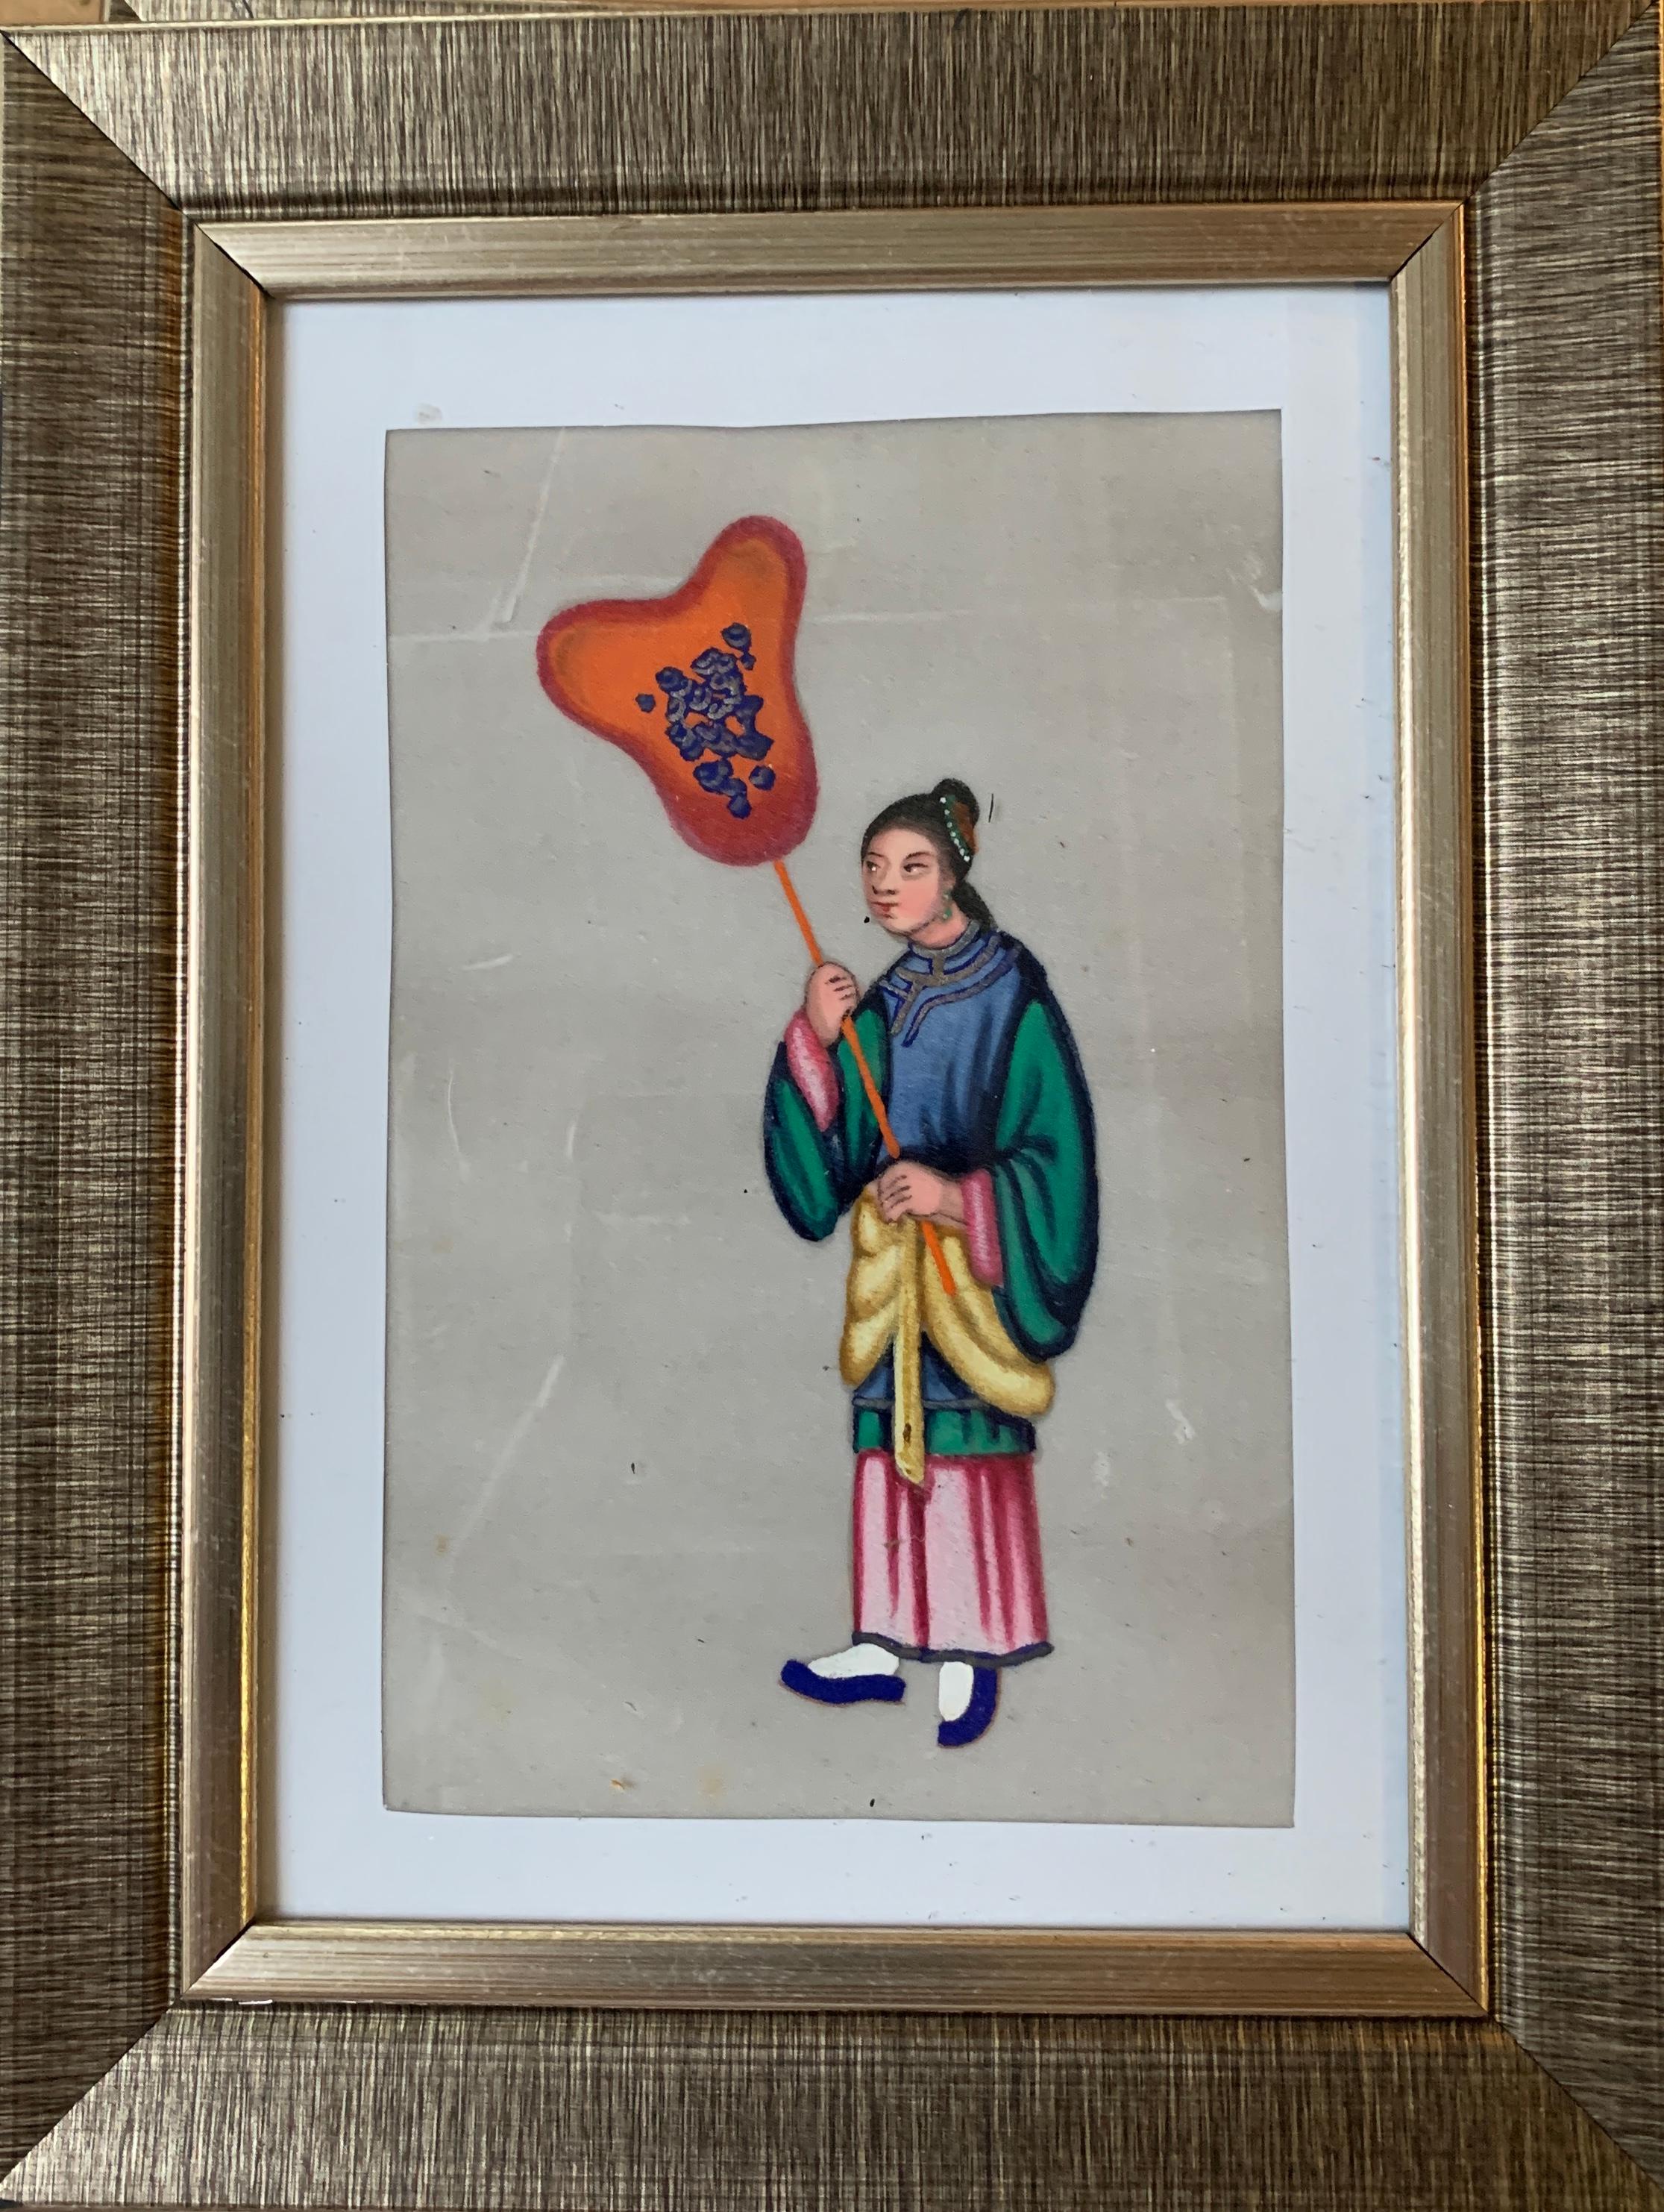 Set of 6 19th century Chinese gouache or watercolors of colorful figures.

An interesting set of 3, 7 x 5 inch, and 3, 5 x 3-inch 19th-century figure studies.

Possibly taken from an album these types of paintings were very popular throughout the